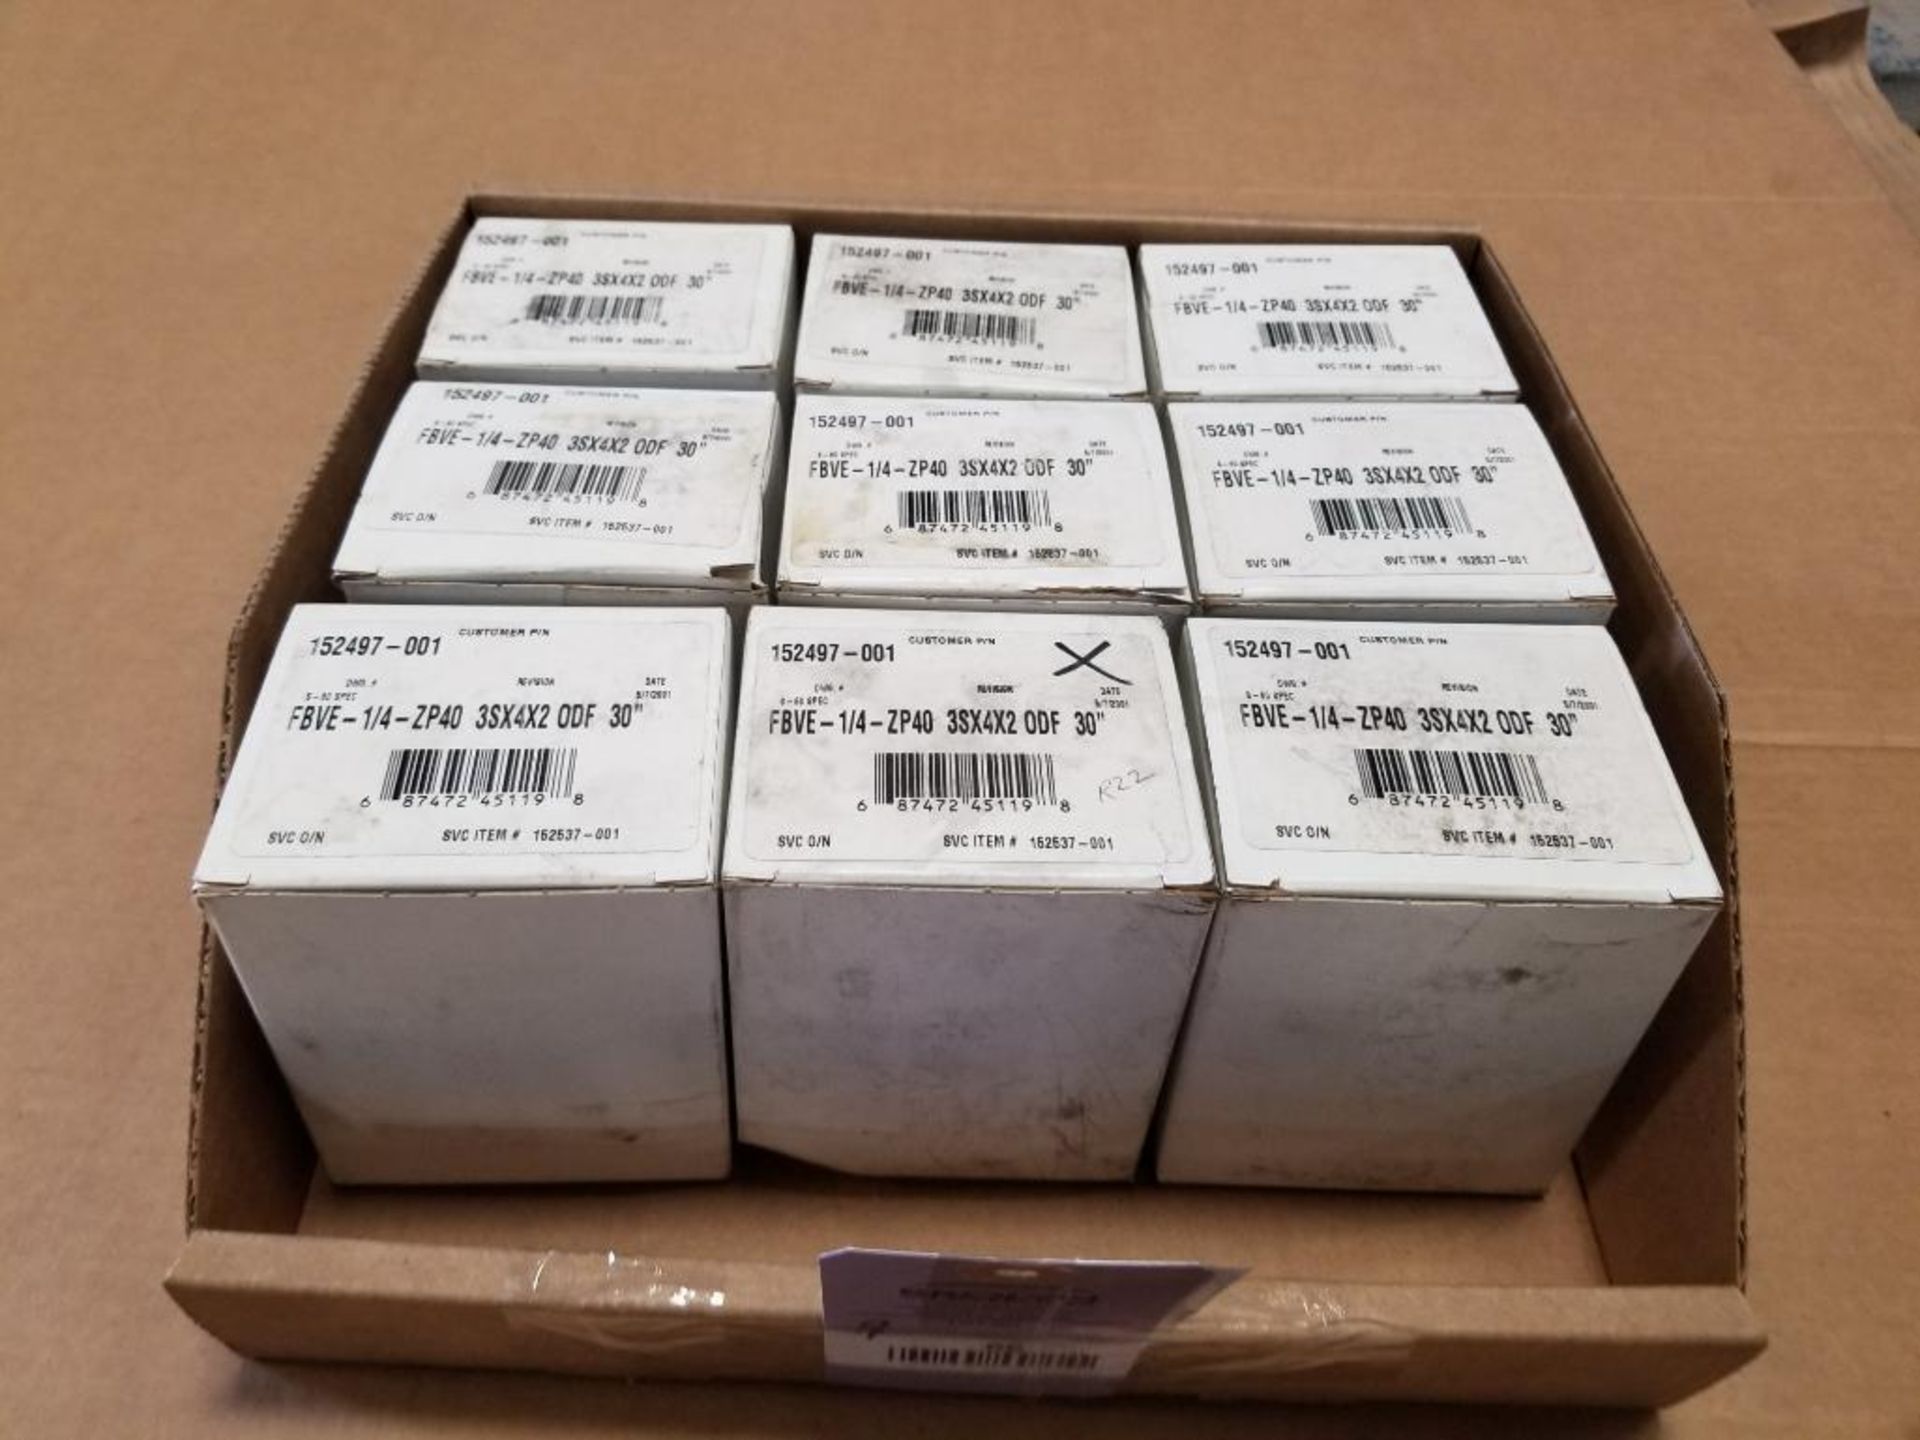 Qty 9 - Valve. Part number FBVE-1/4-ZP40. New in box.